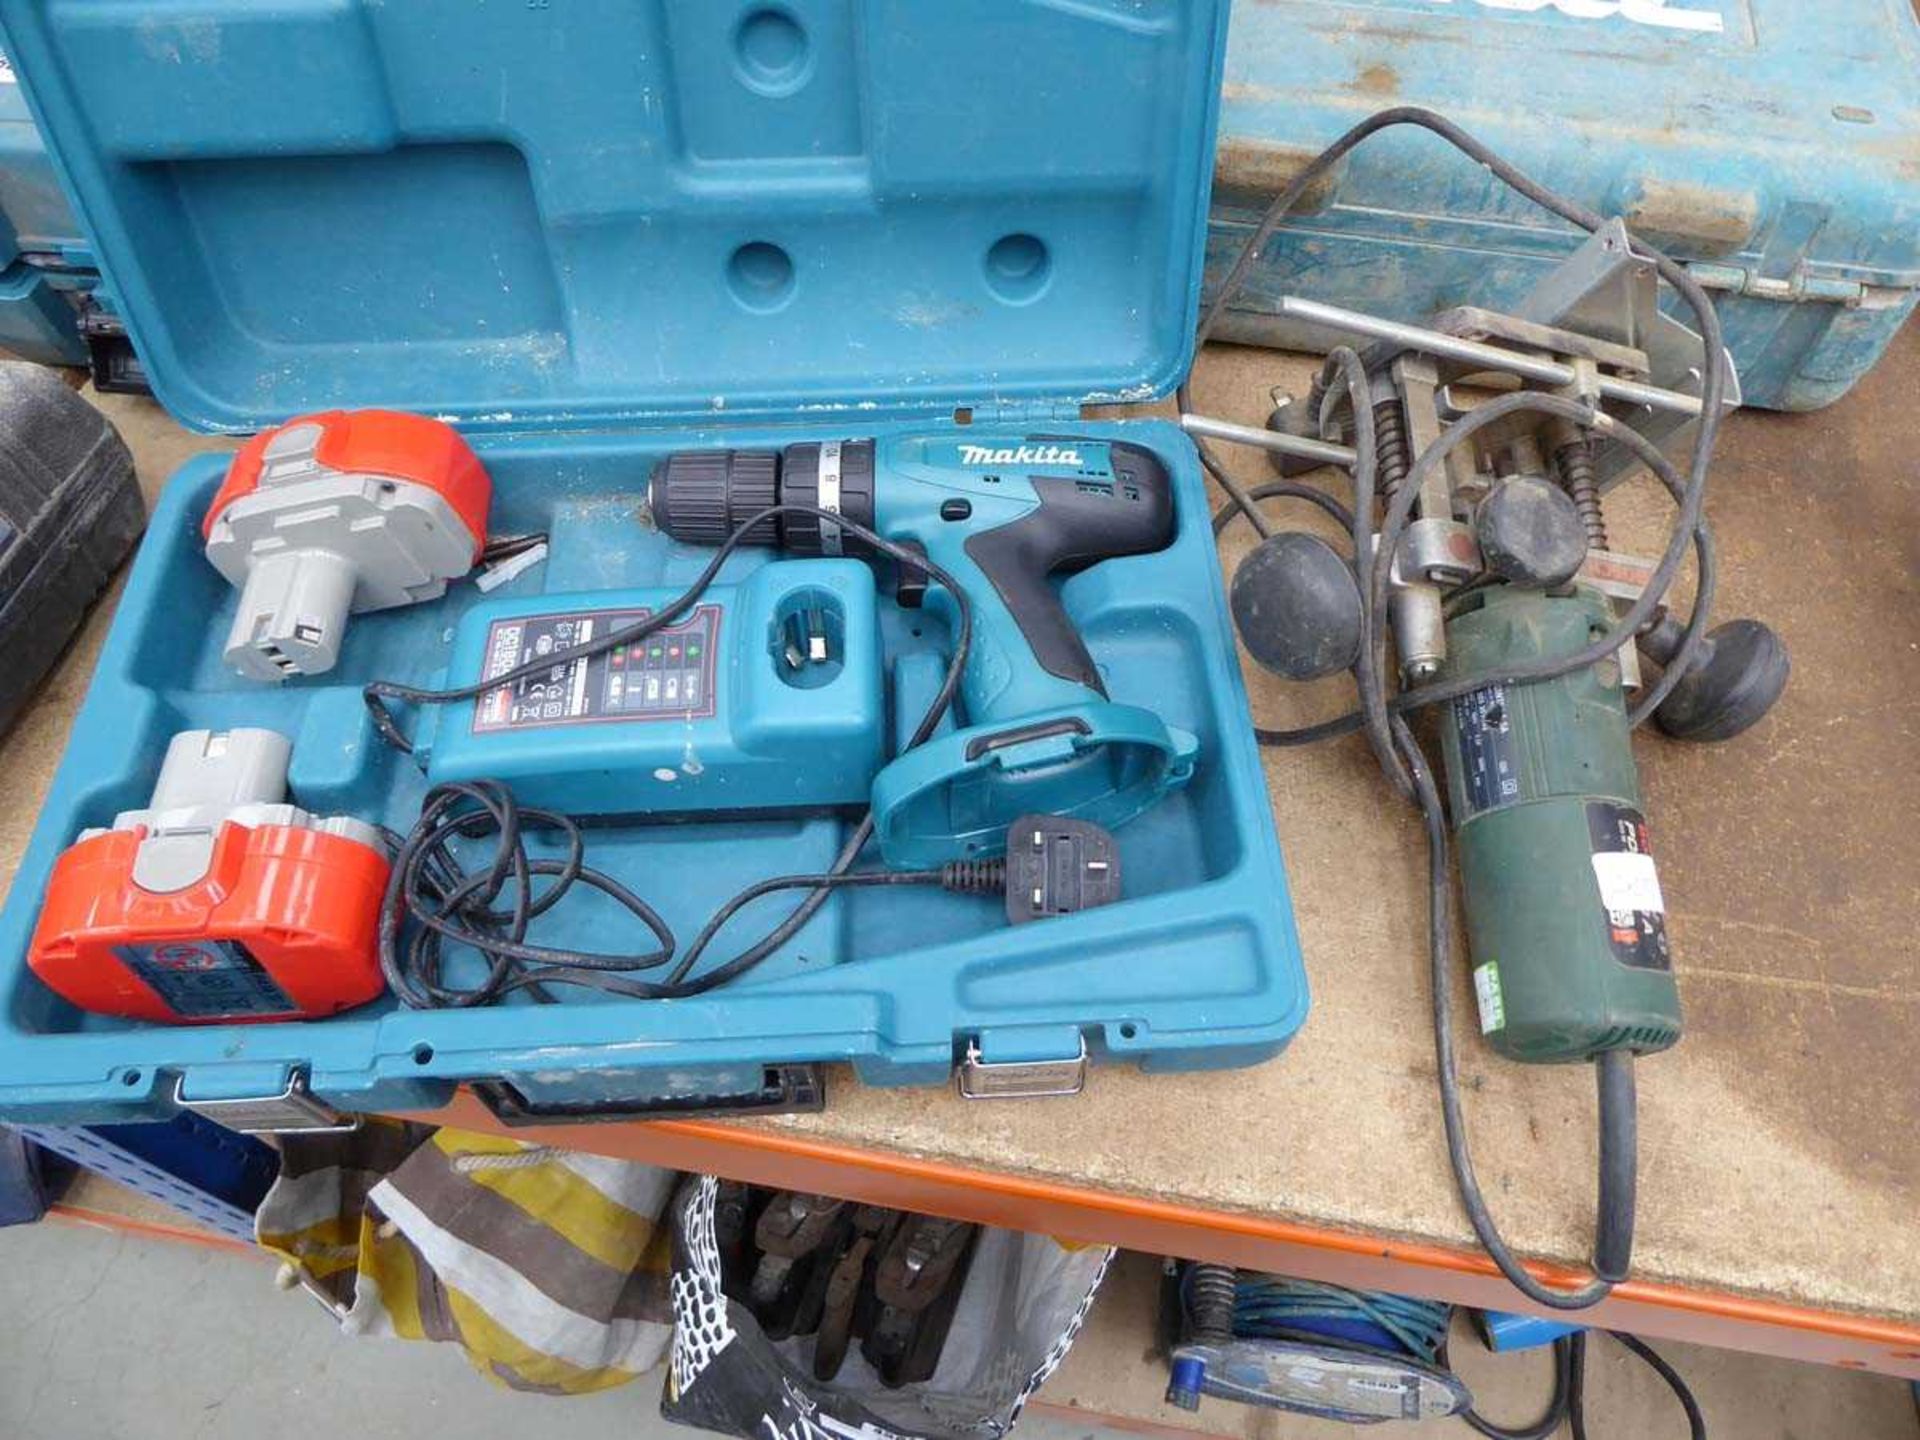 Makita battery drill with 2 batteries and charger together with Bosch router